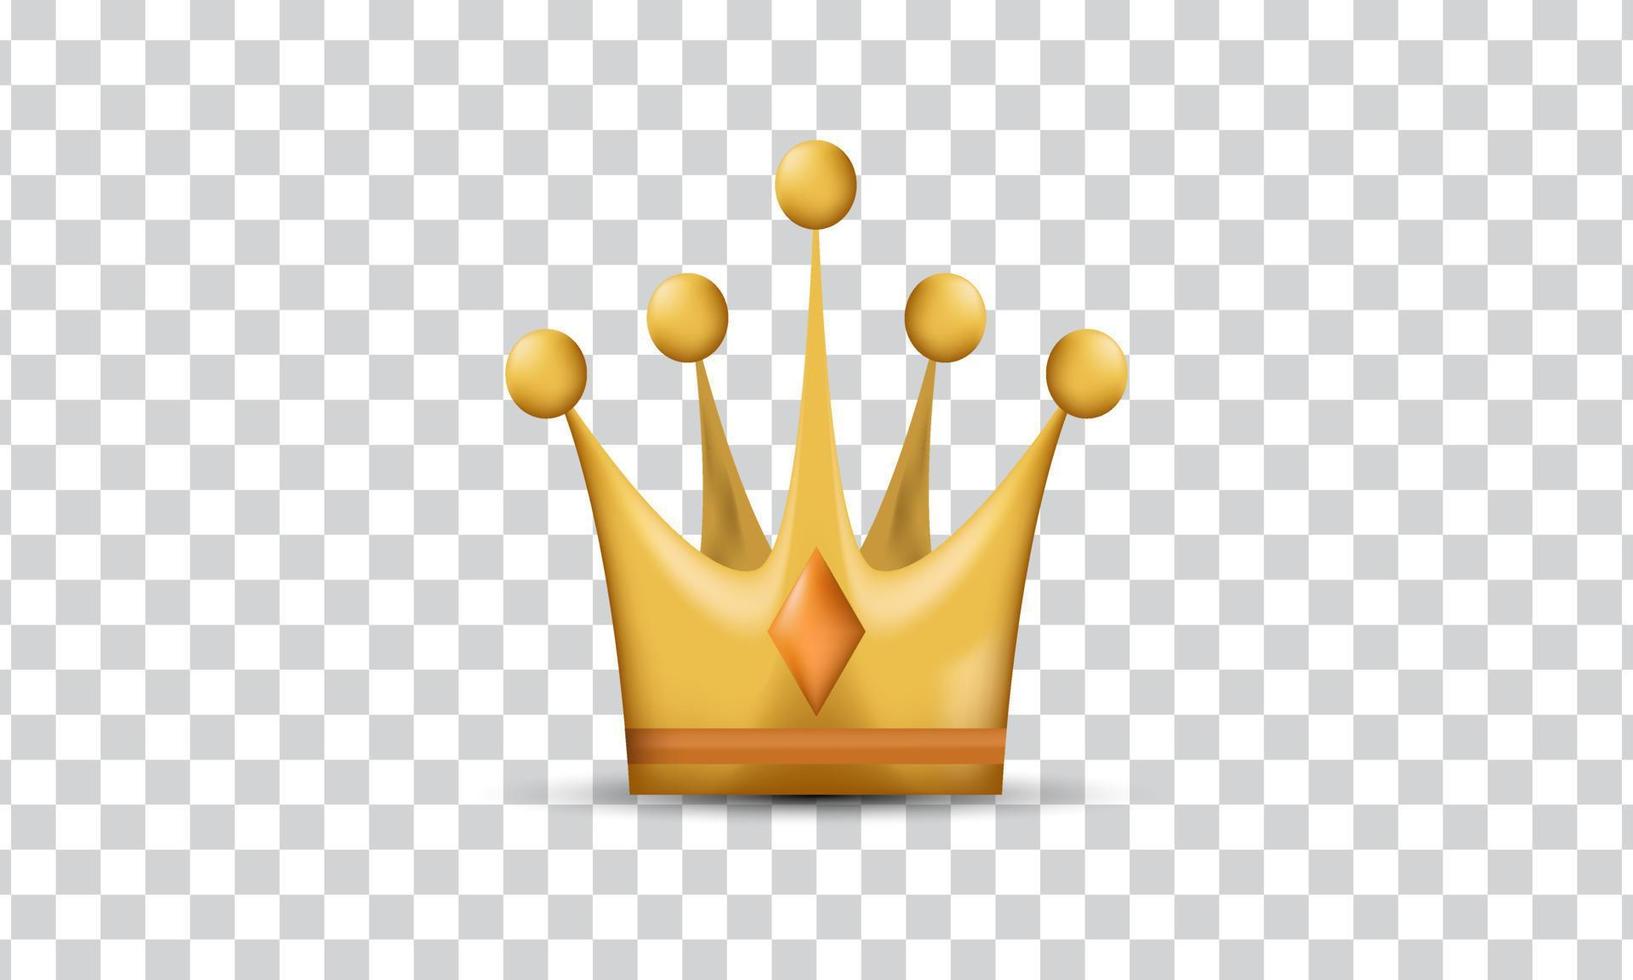 unique 3d gold crown realistic icon design isolated on vector